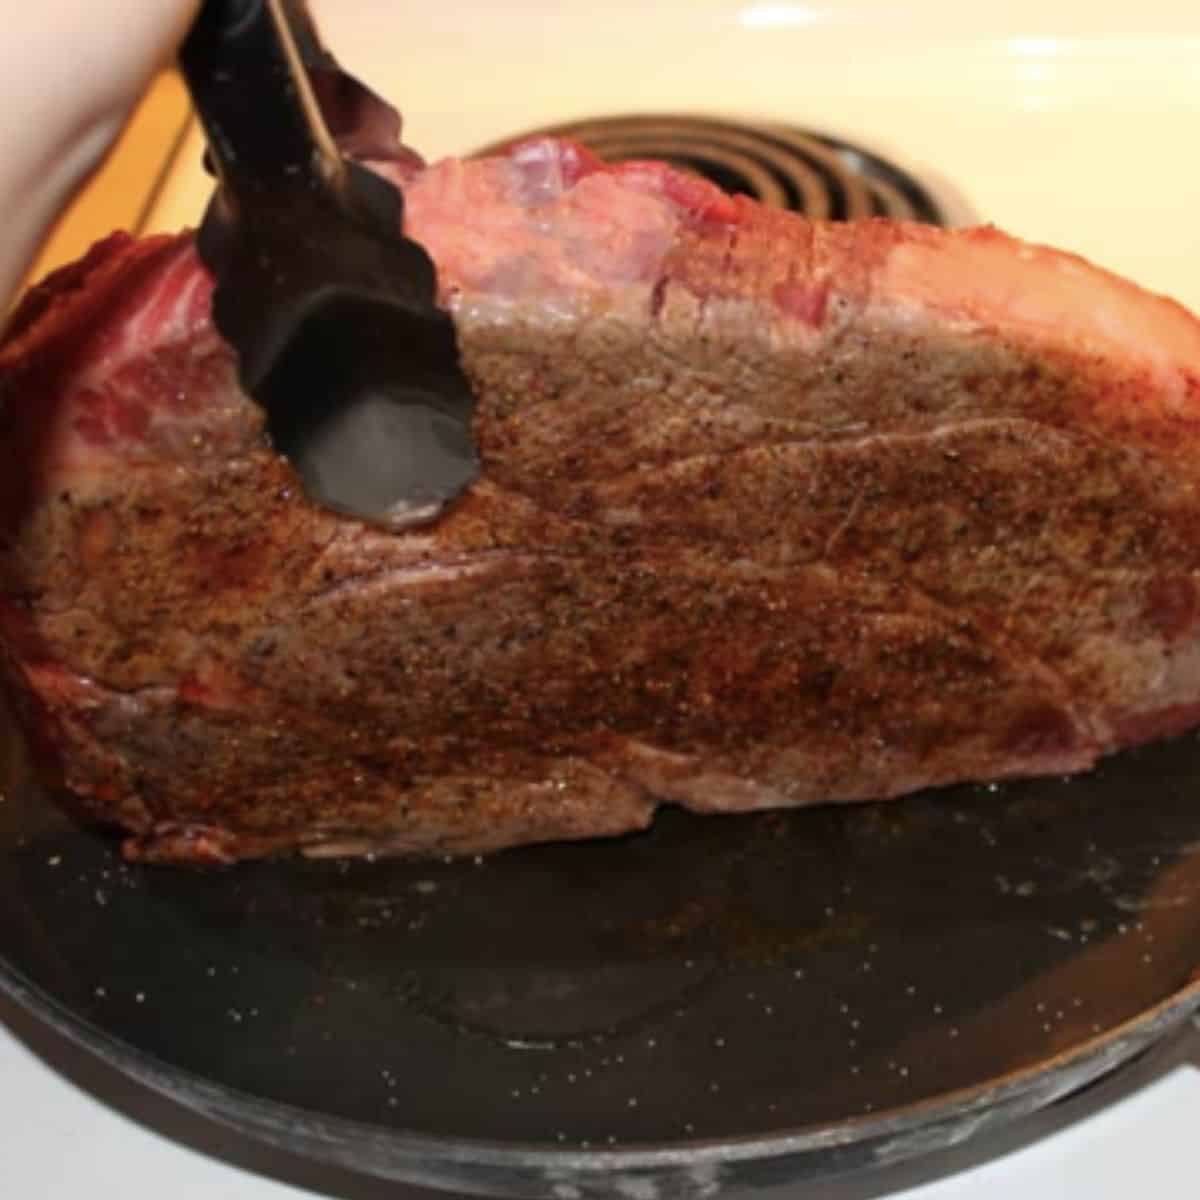 tongs holding a chuck roast in a frying pan so it can sear all the edges